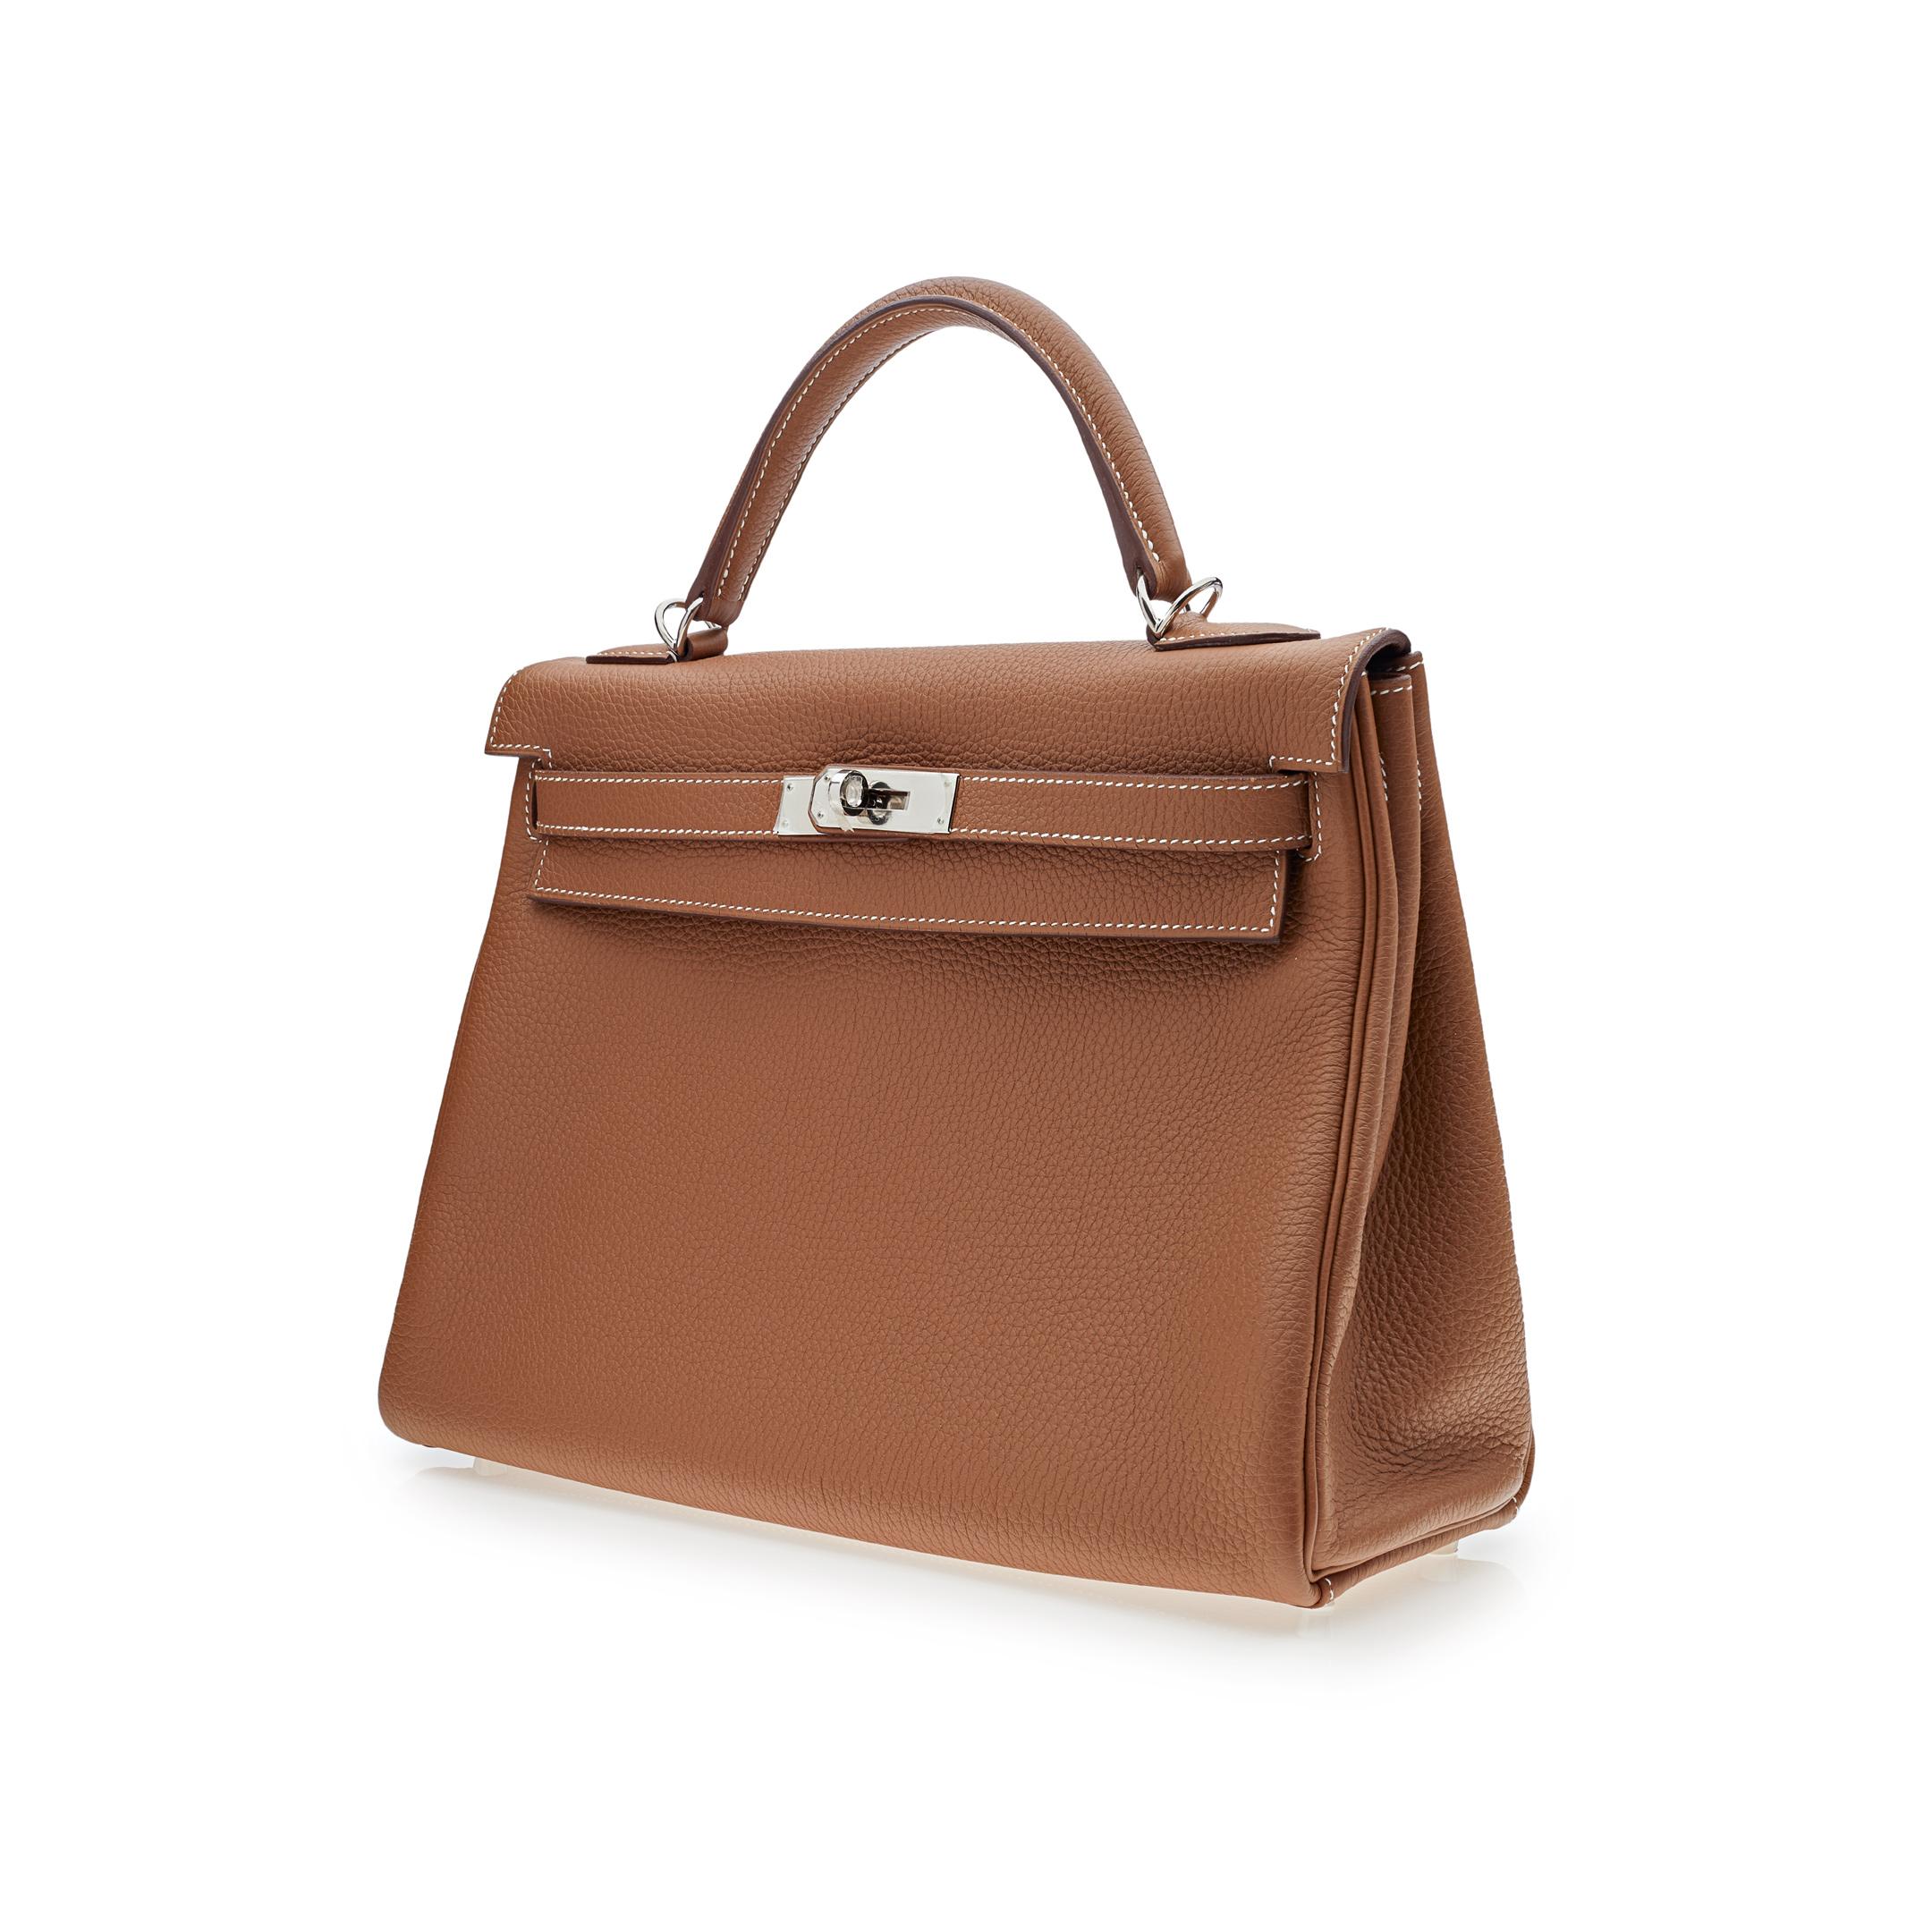 Hermes Kelly 32 Retourne Gold Togo Leather Palladium Hardware

Condition: New
Material: Togo Leather
Measurements: 32cm (w) x 23cm (h) x 10.5cm (d)
Hardware: Palladium plated

*Comes with full original packaging.
*Full plastic on hardware.